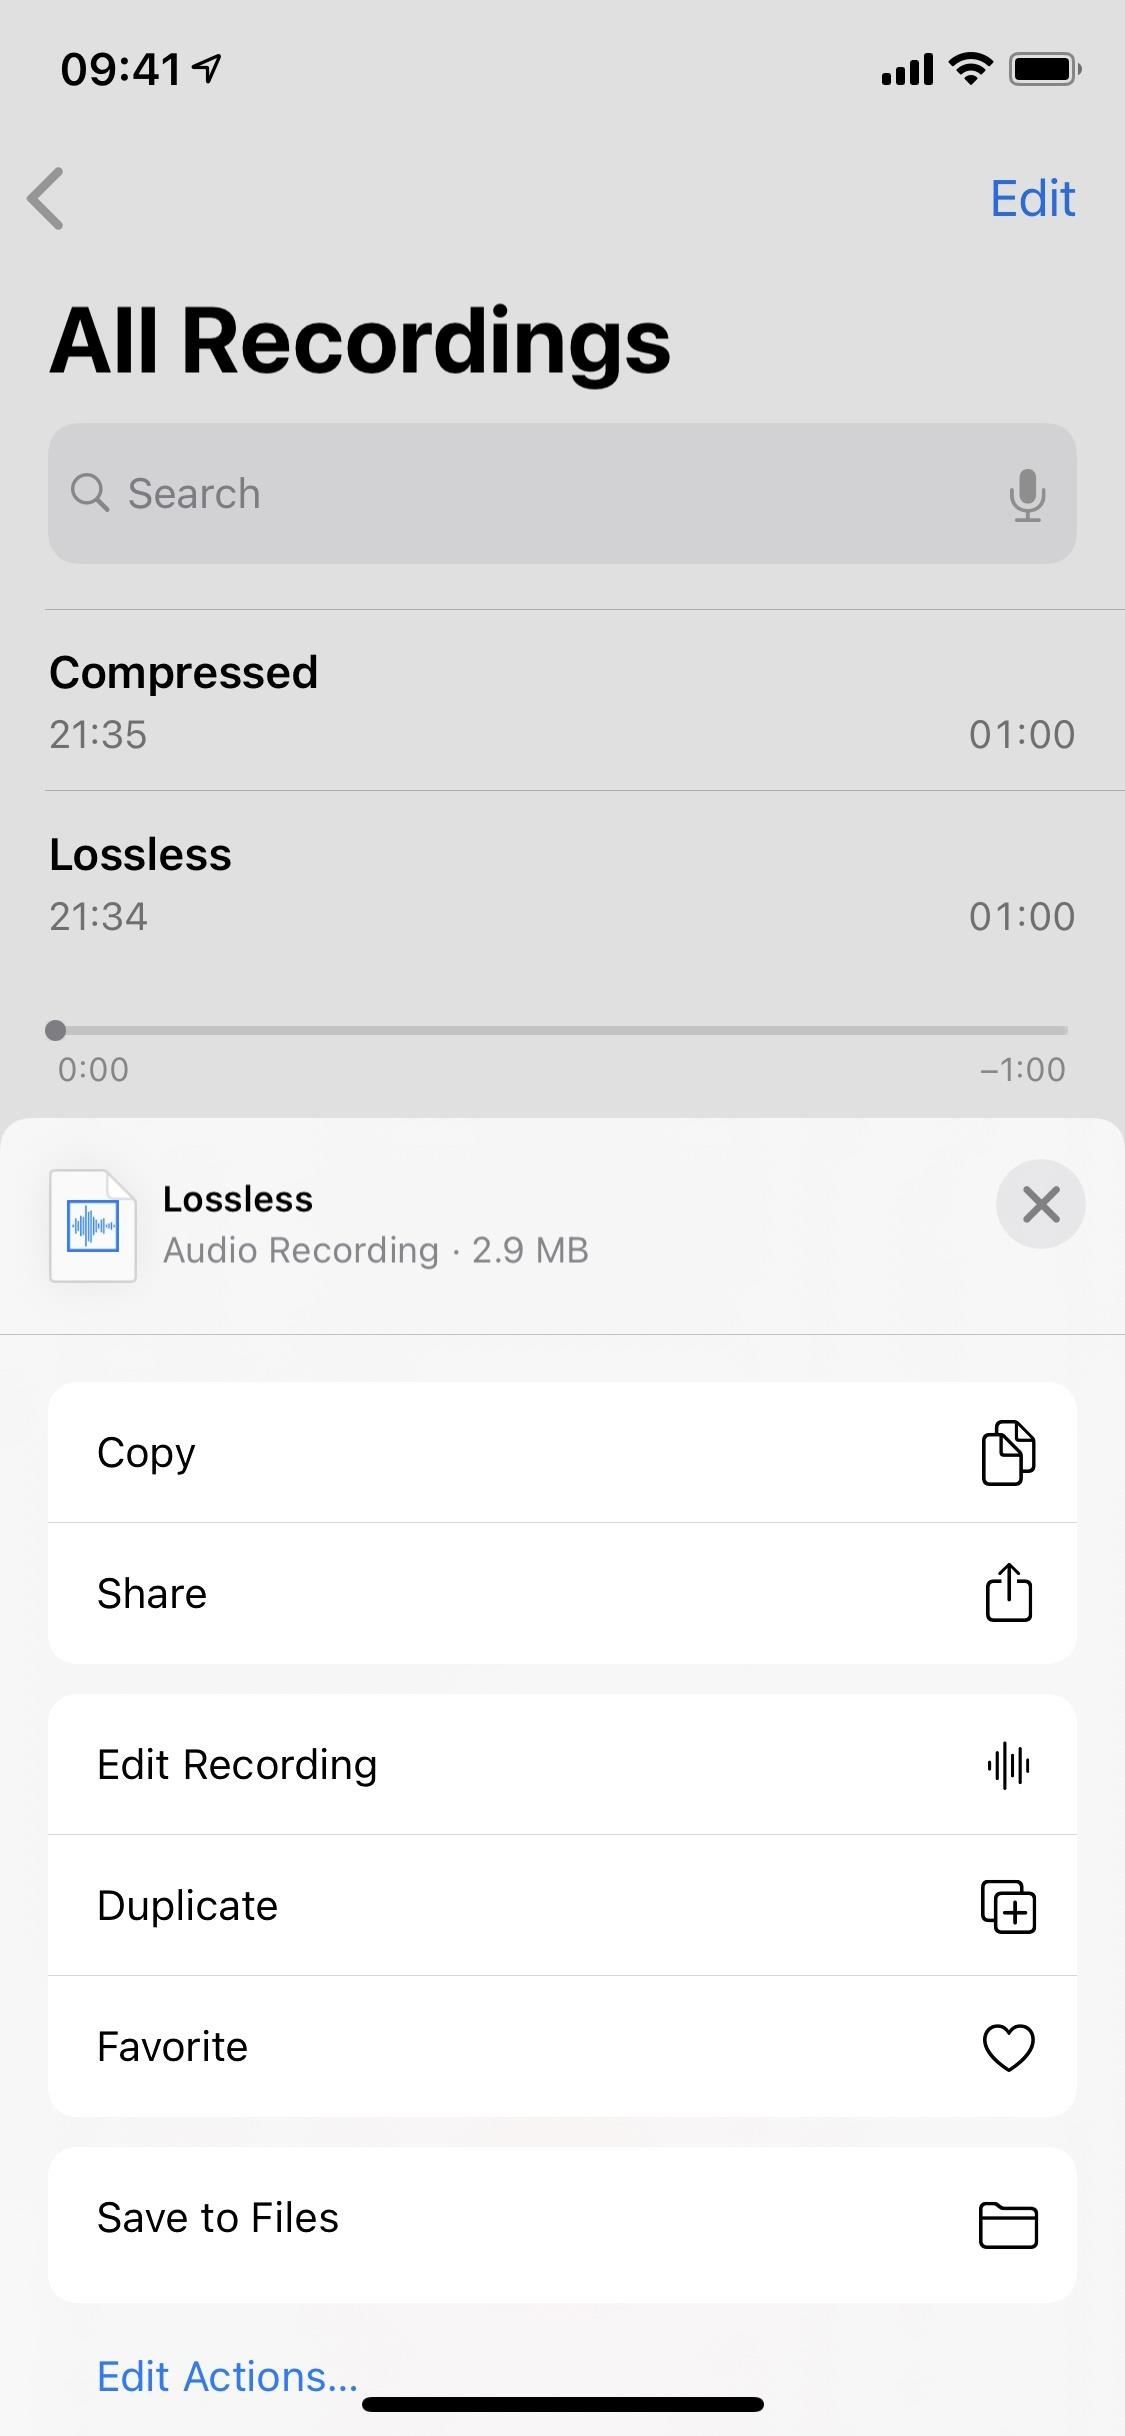 How to Improve Audio Quality in Voice Memos on Your iPhone to Get Better-Sounding Files